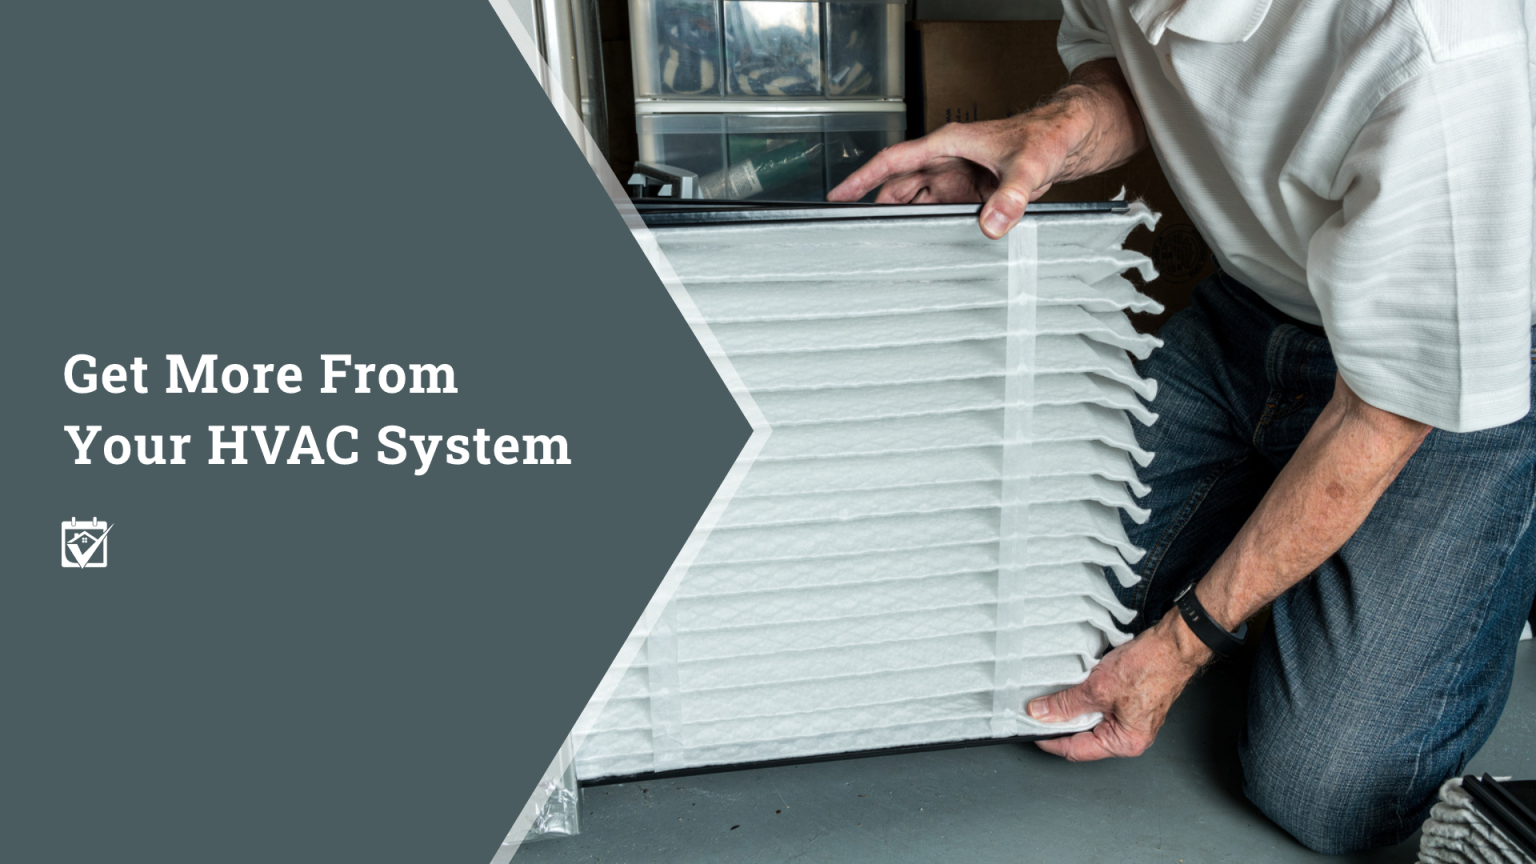 Get More From Your HVAC System